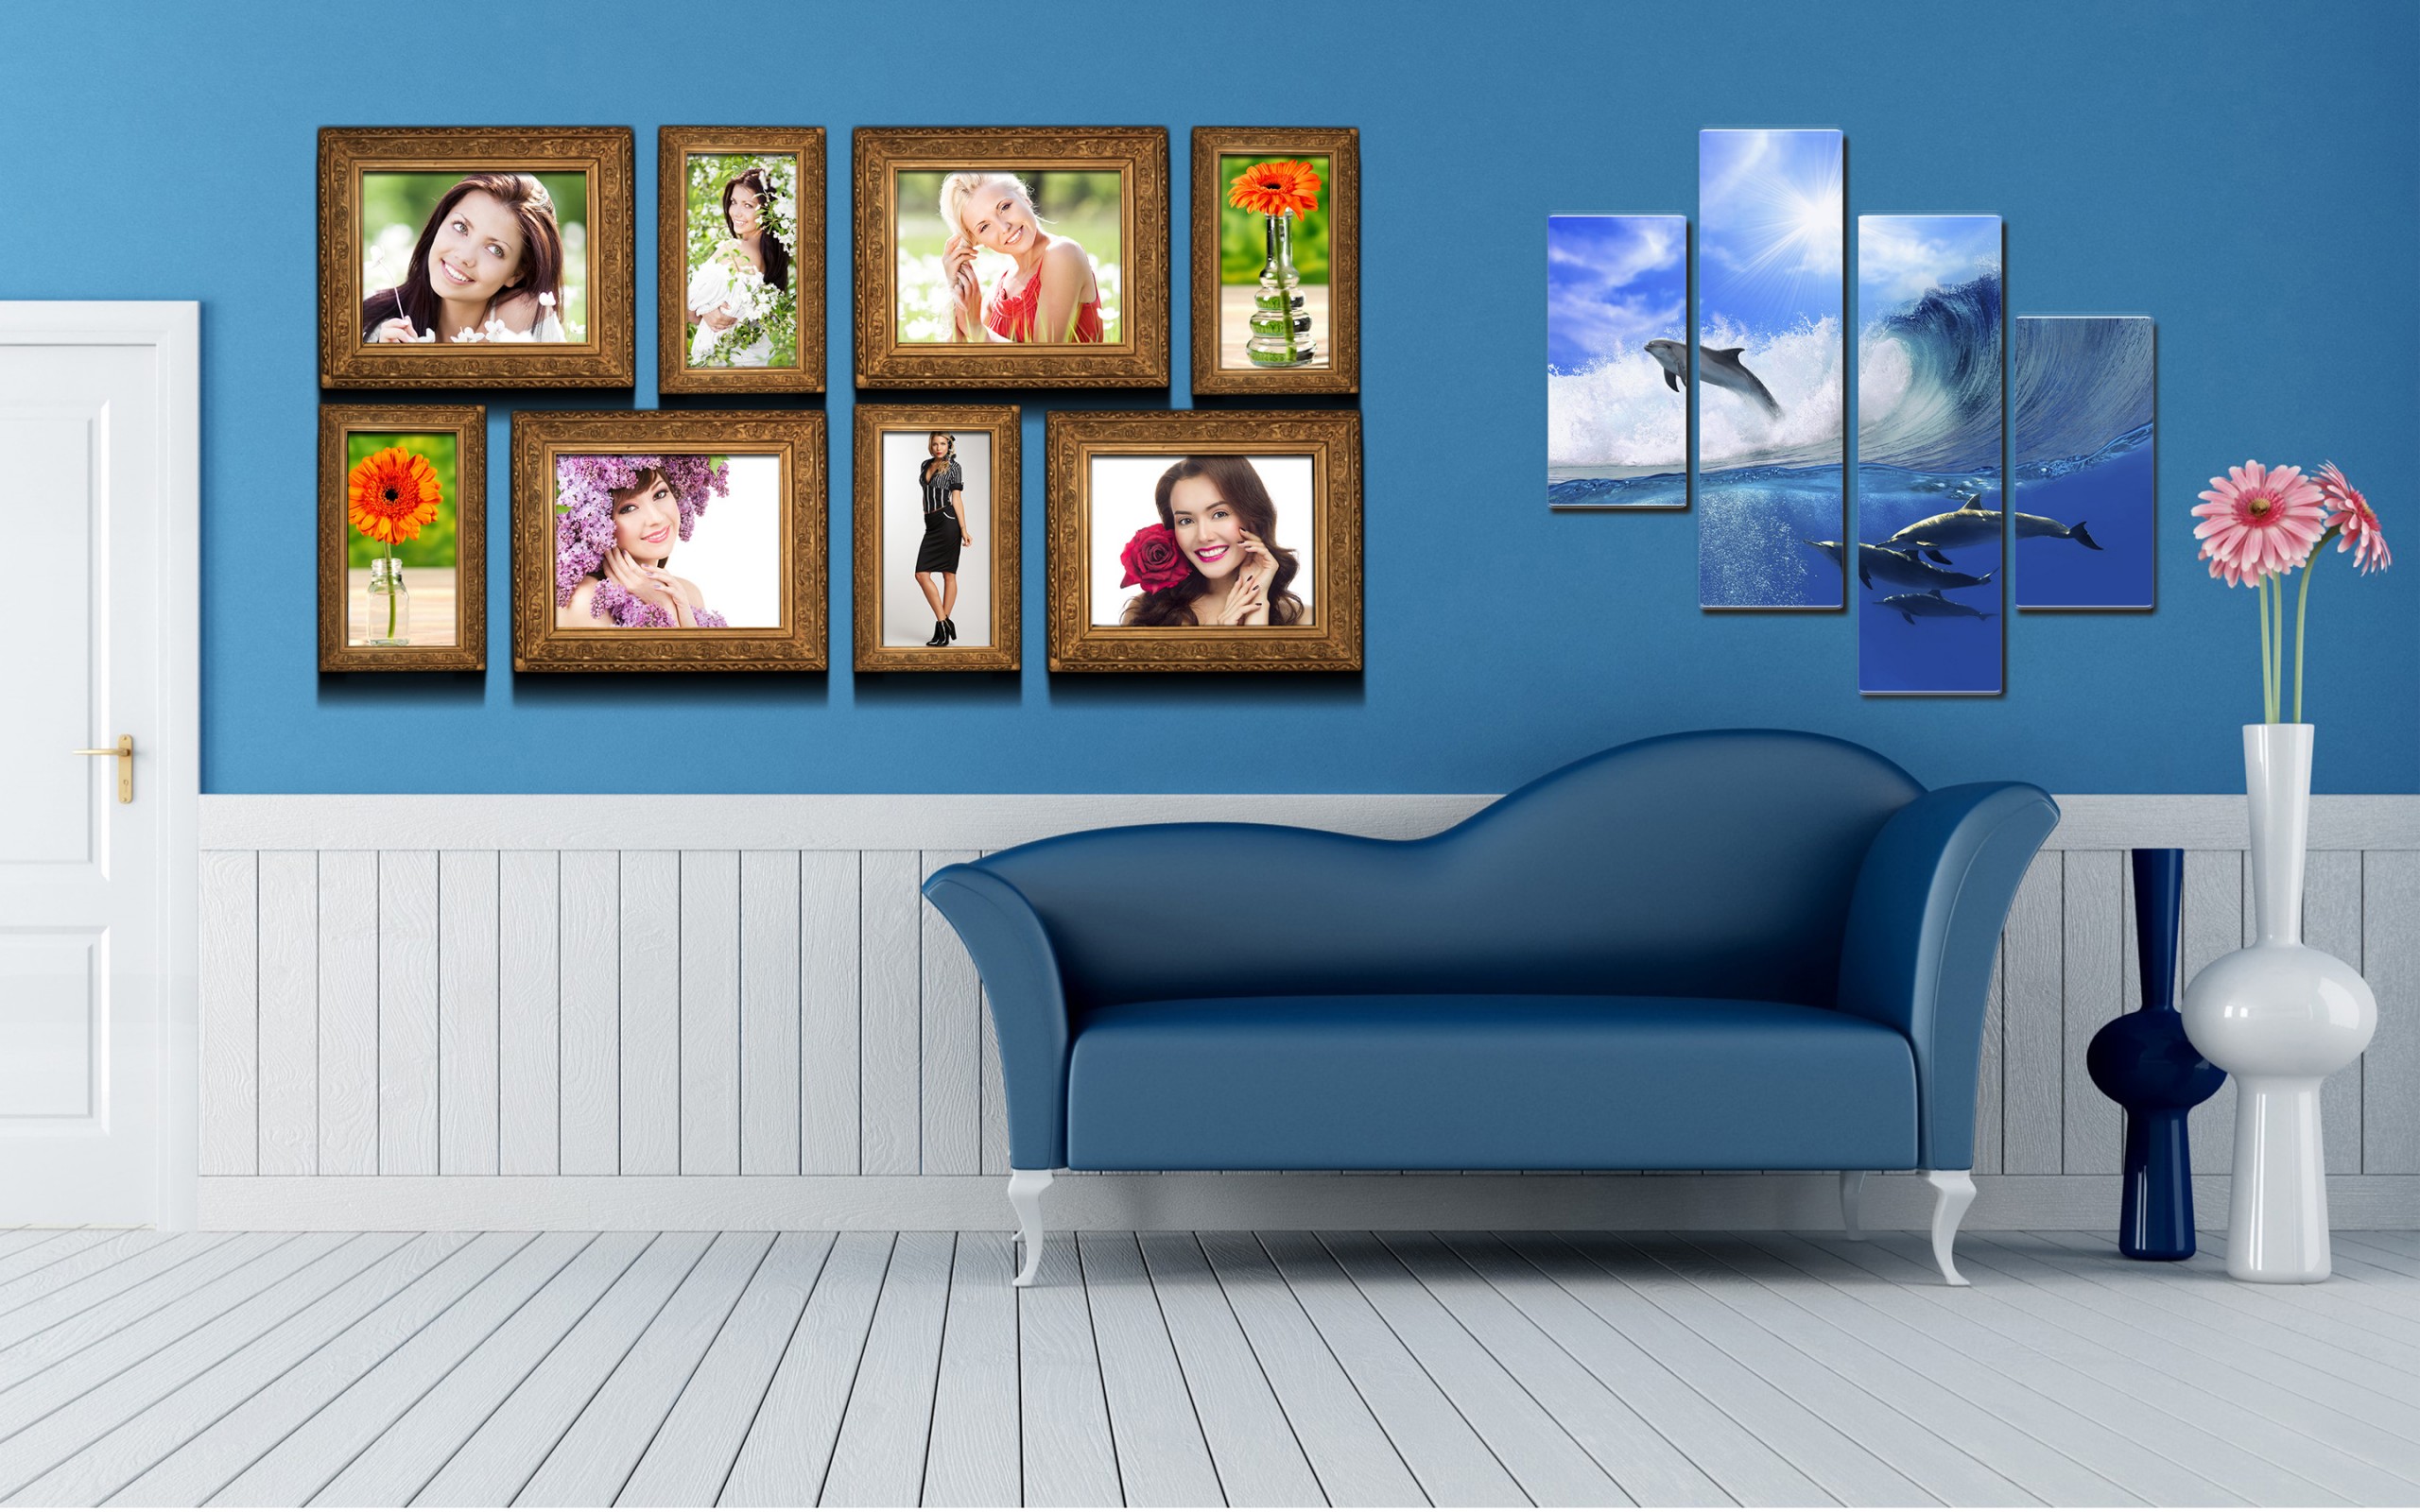 interior, Sofa, Flowers, Vases, Pictures, Polyptych, Dolphins, Faces, Furniture Wallpaper